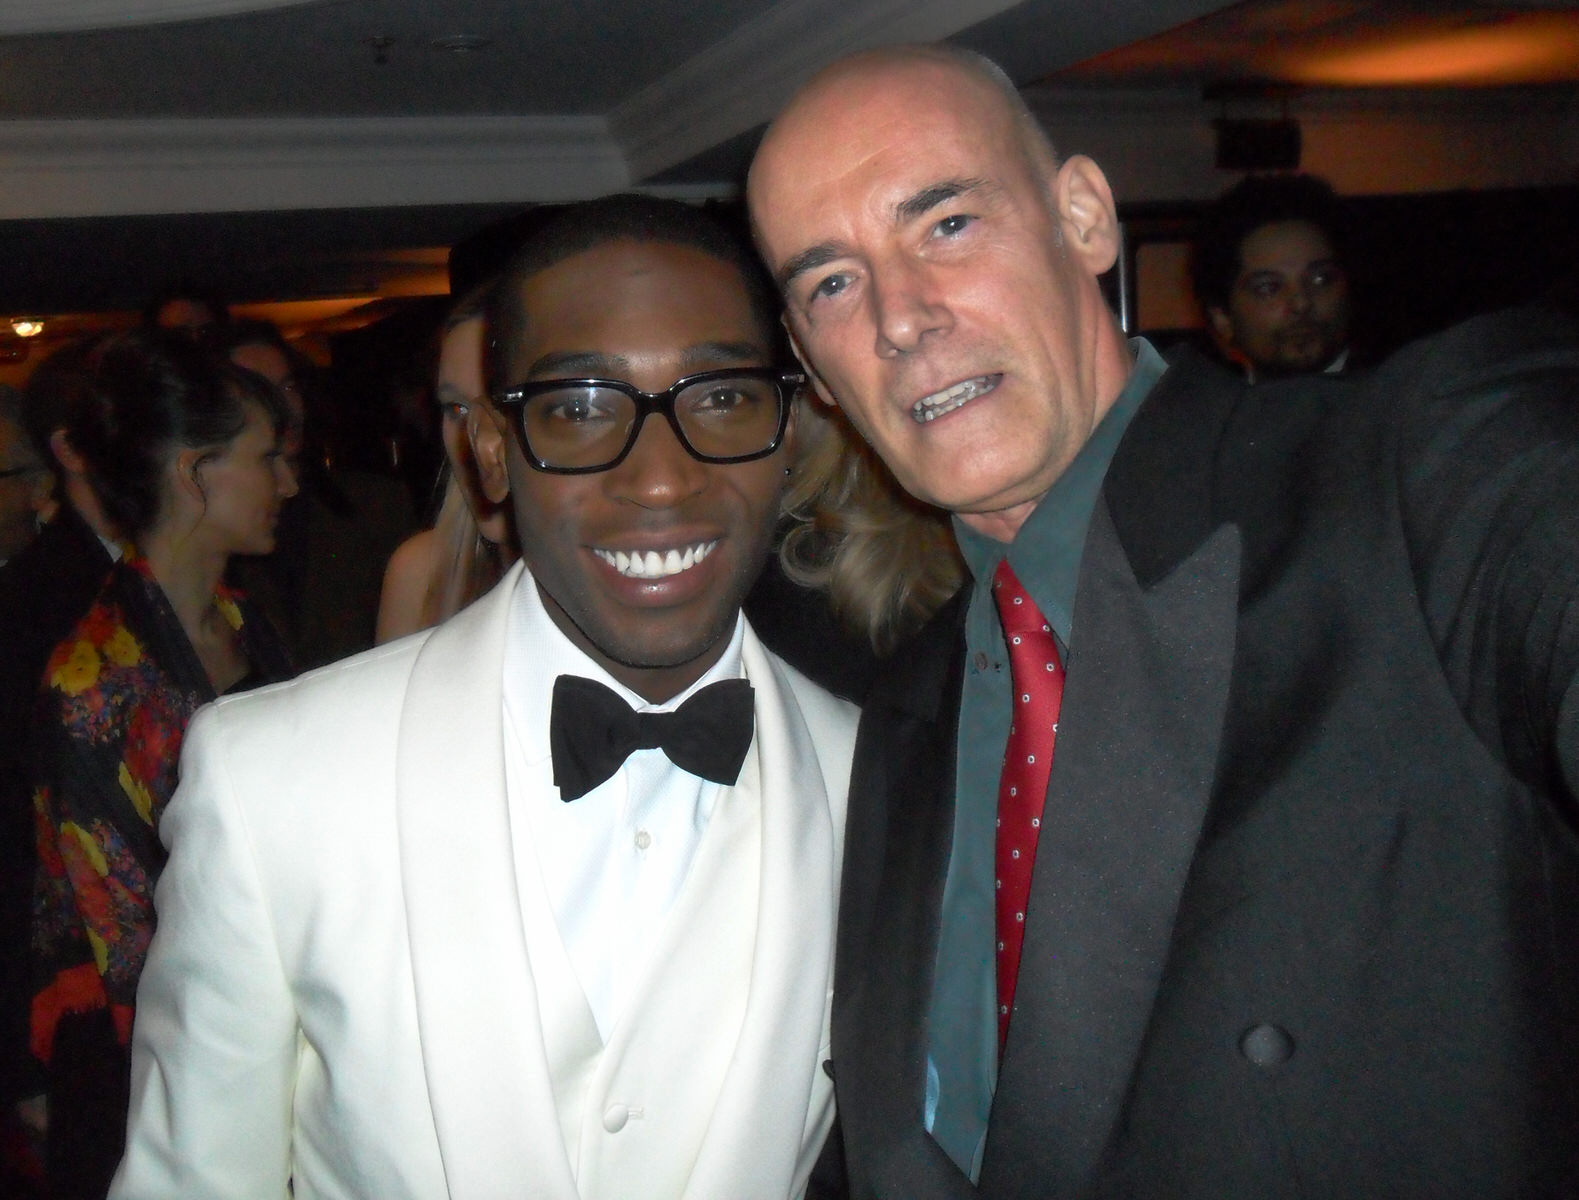 BAFTA awards 2014 - after party. Director Ian Vernon with rapper Tinie Tempah